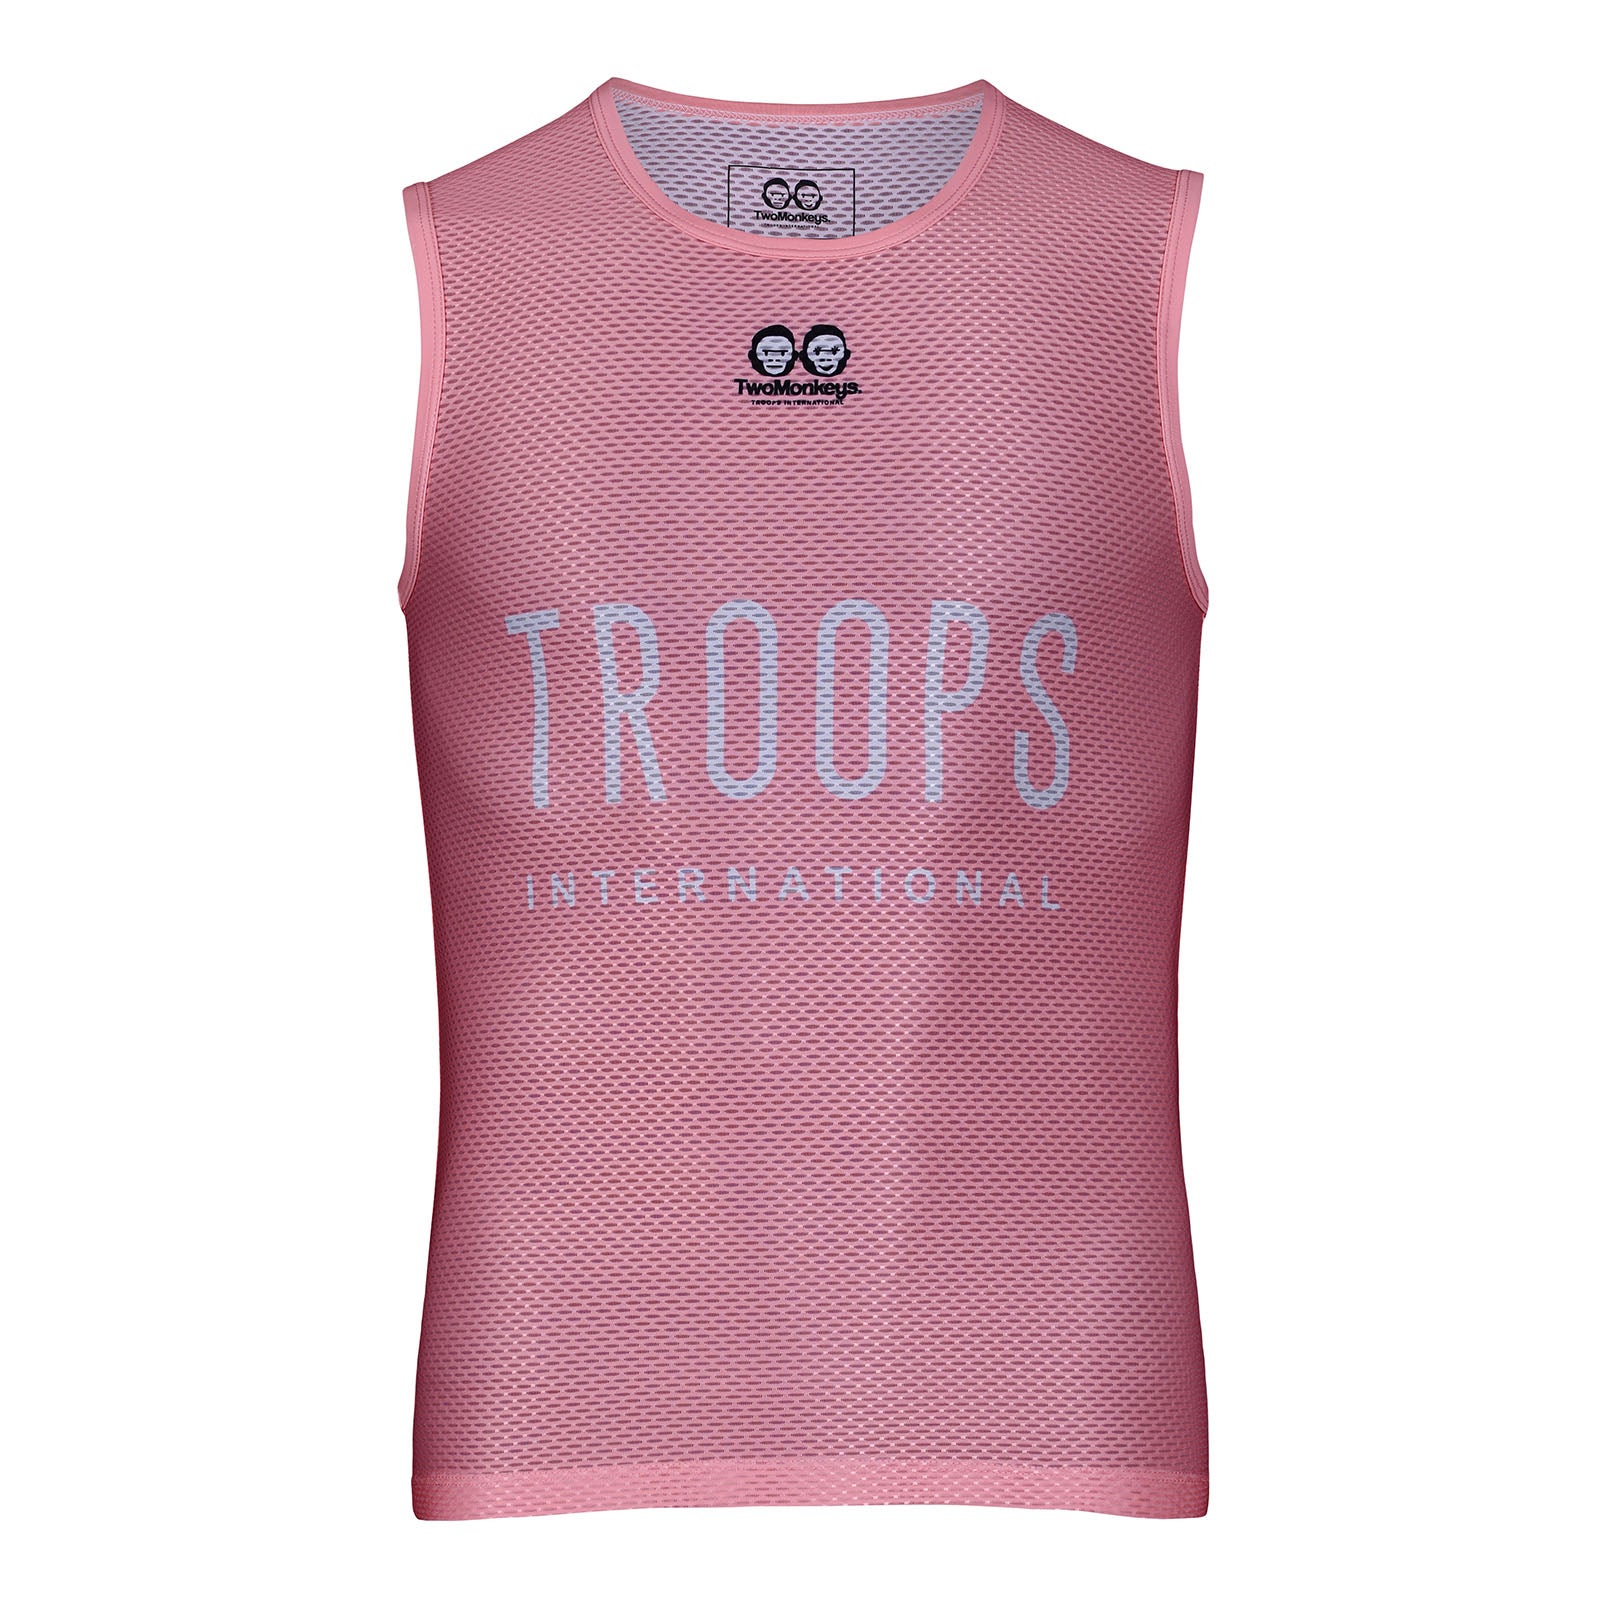 Troops Base Layer